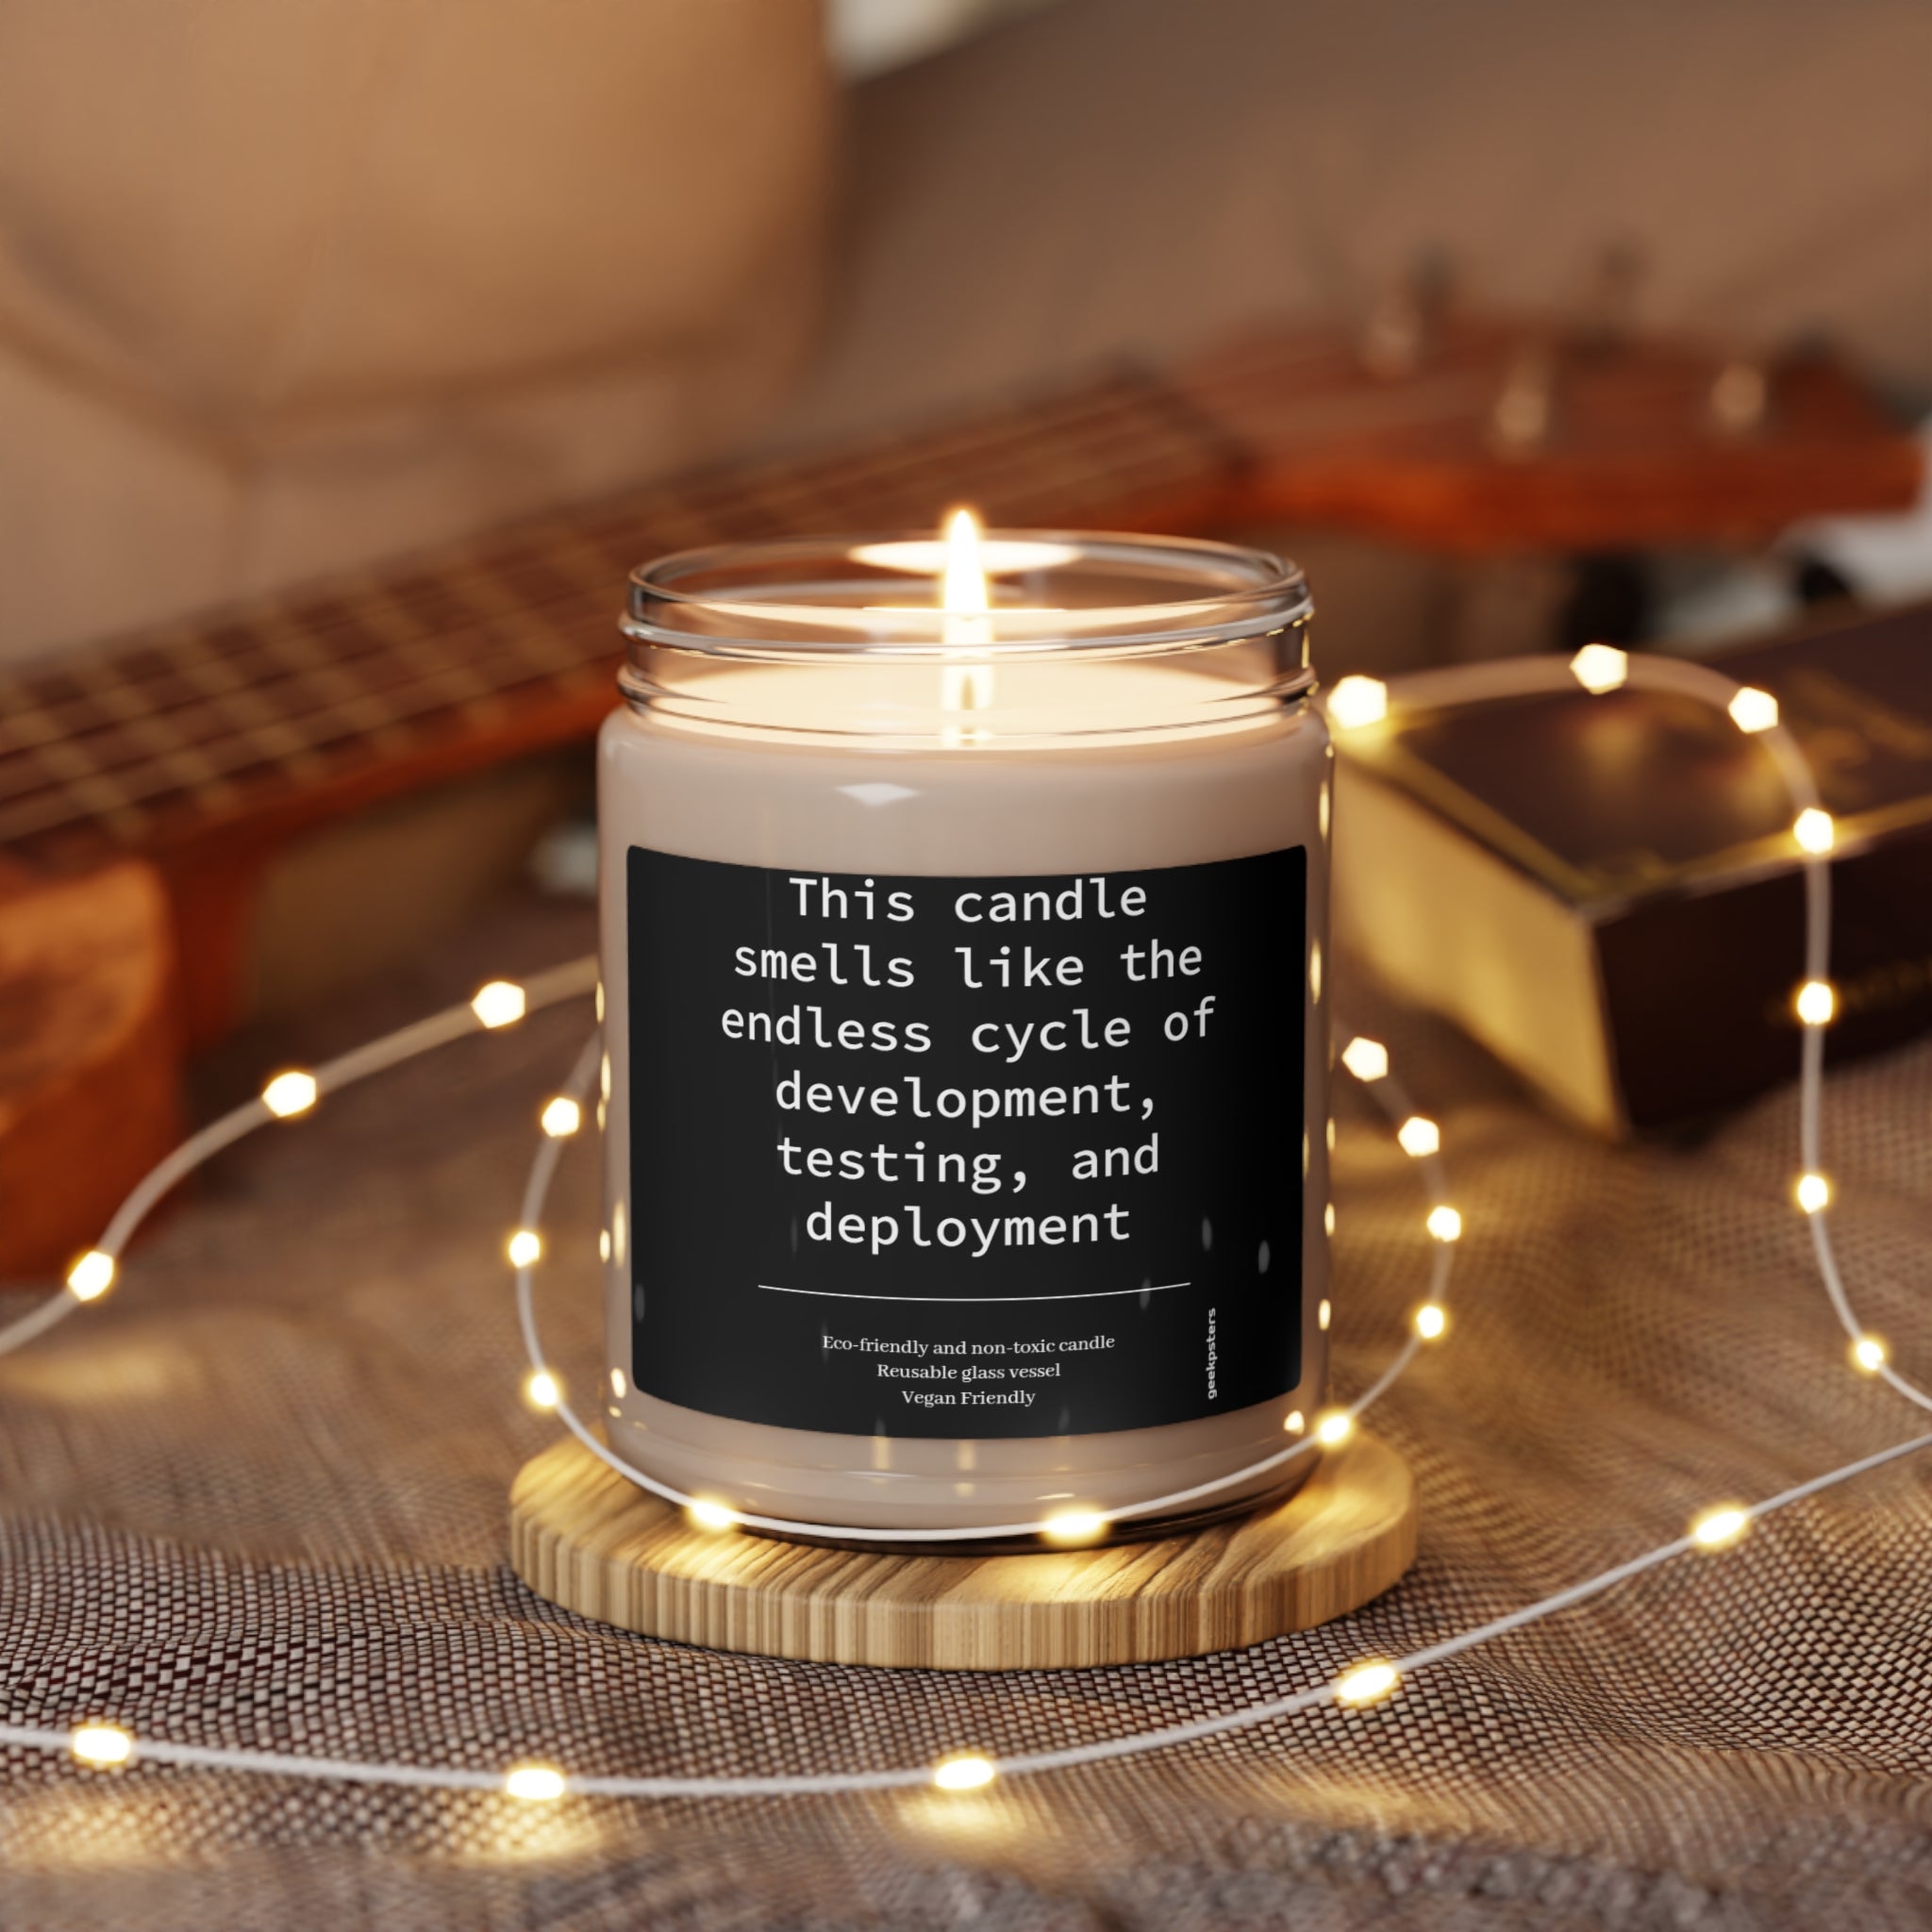 A lit This Candle Smells Like the Endless Cycle of Development, Testing and Deployment - Scented Soy Candle, 9oz in a jar with a label that reads, "this candle smells like the endless cycle of development, testing, and deployment," on a table with fairy lights and a gift box.